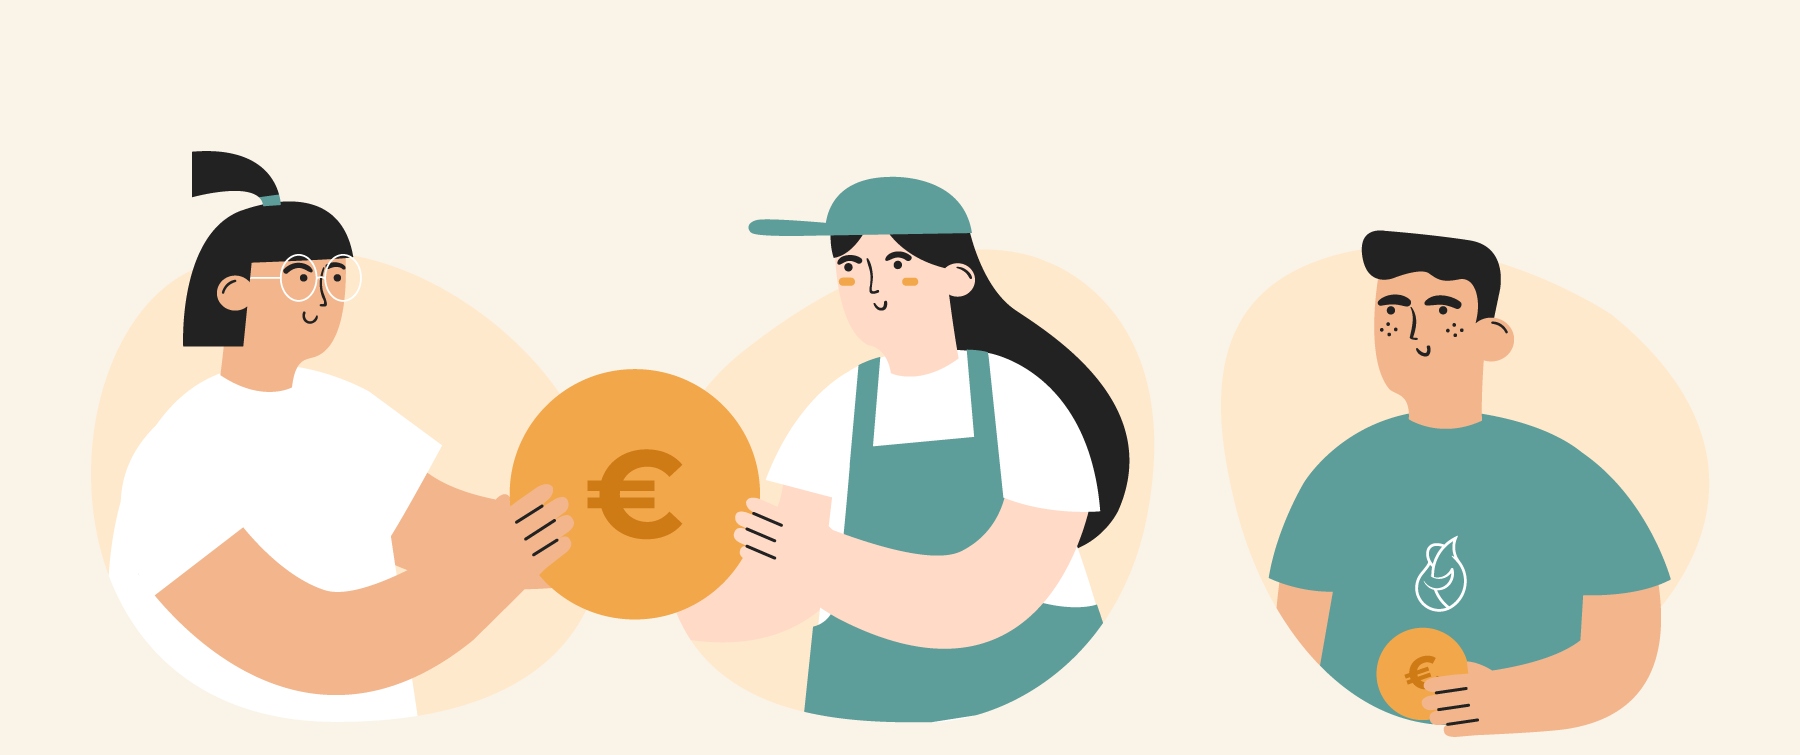 Illustration of three people (consumer and farmer) with a coin in their hand